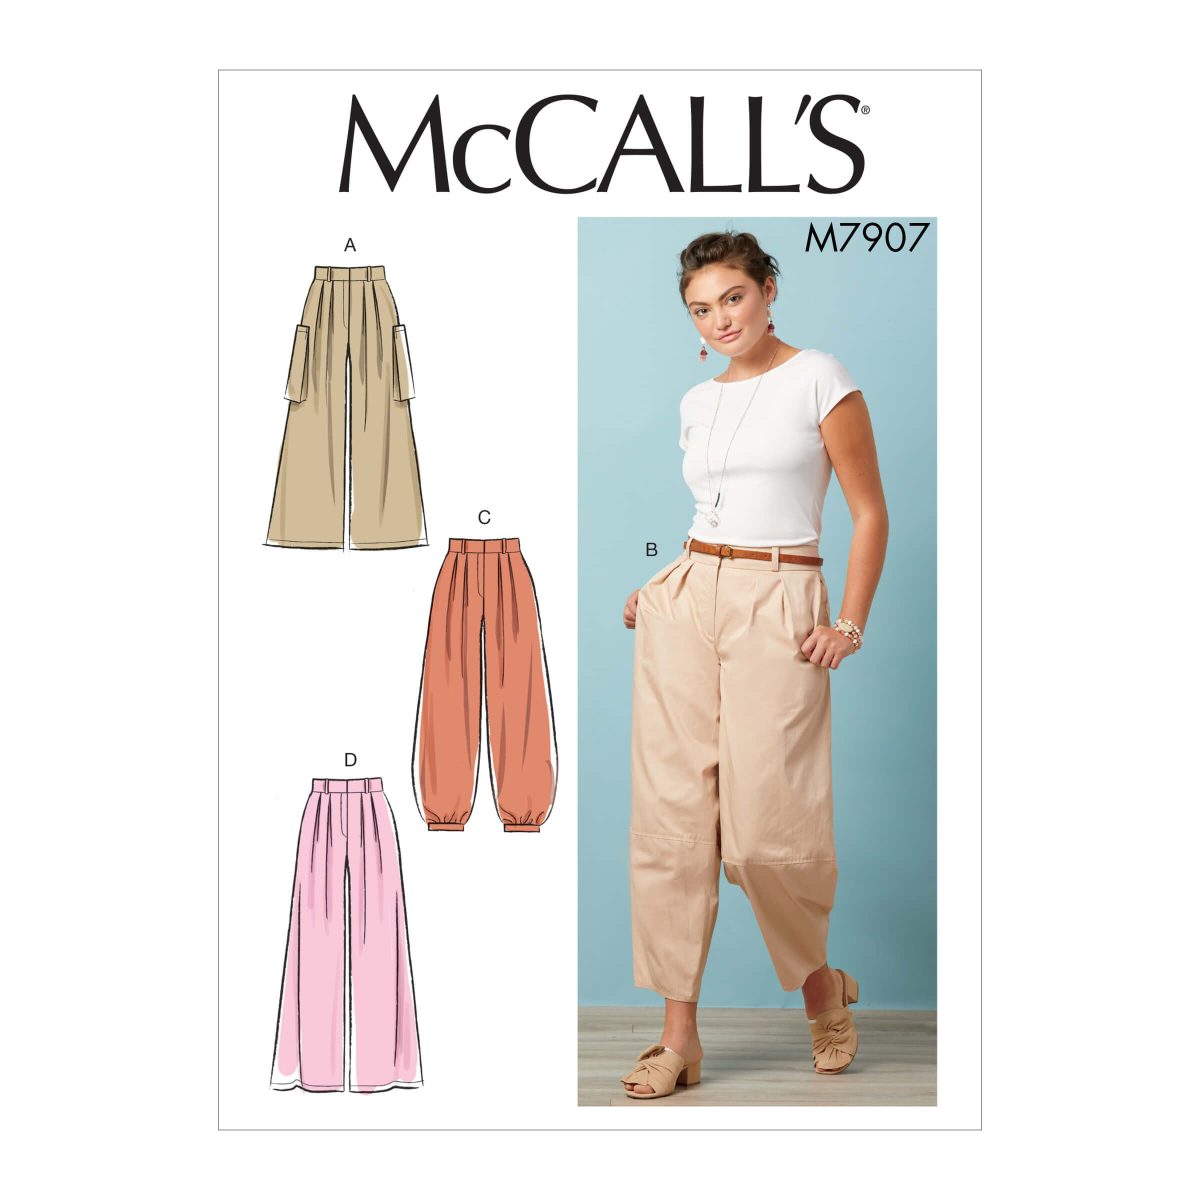 McCall's Sewing Pattern M7907 Misses' Pants